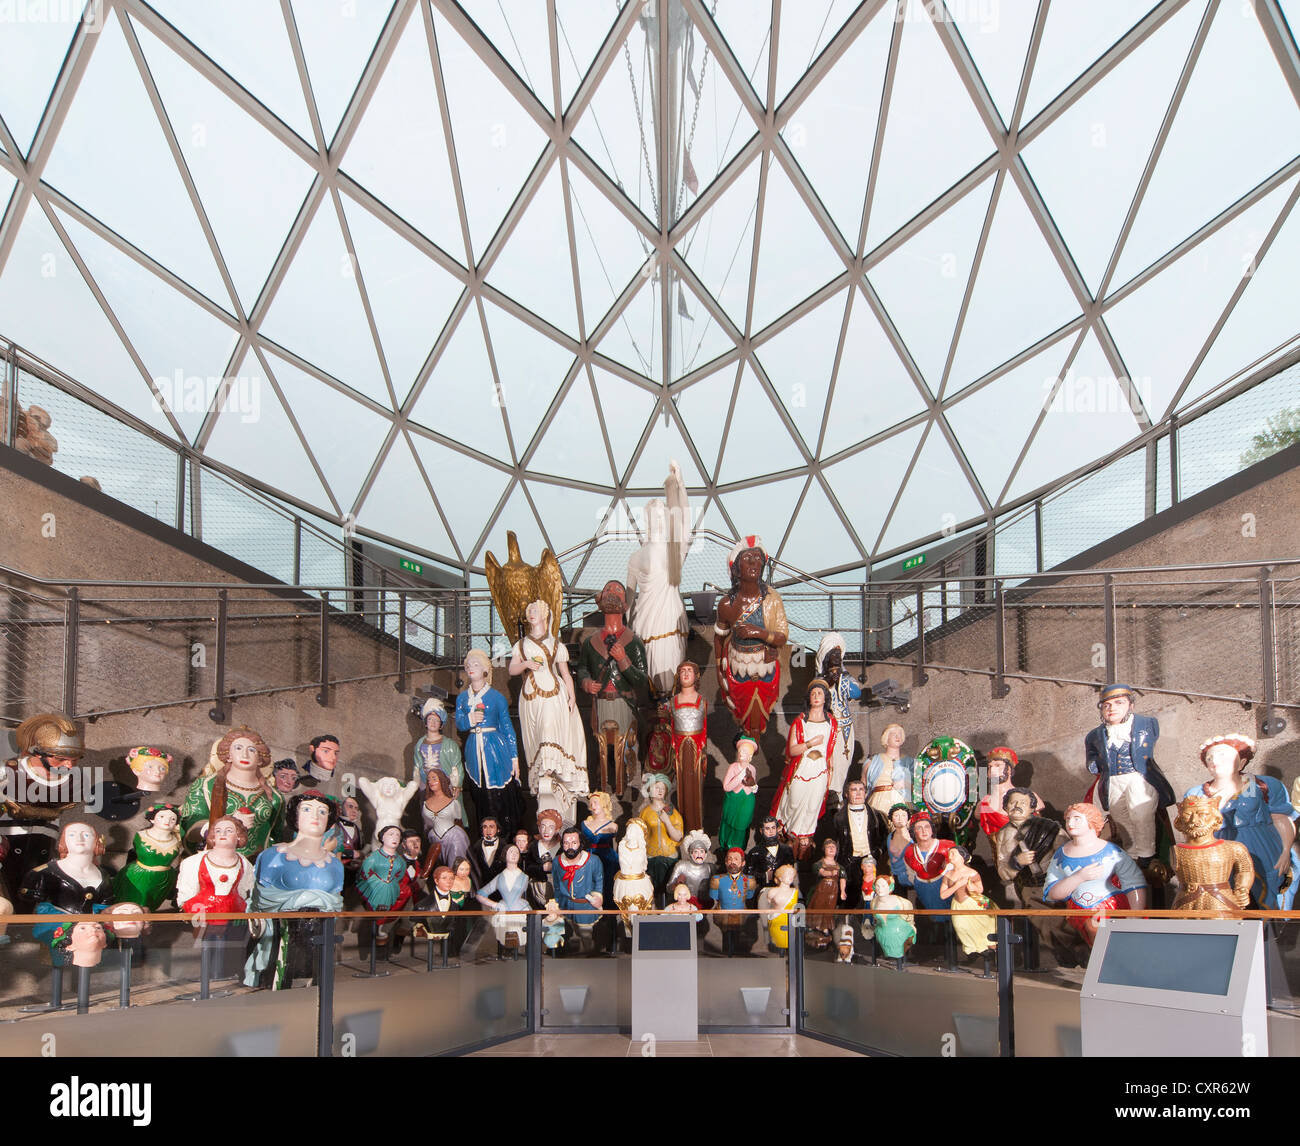 Largest collection of over 80 merchant navy figureheads on display at he Cutty Sark ship in dry dock in Greenwich London England Stock Photo